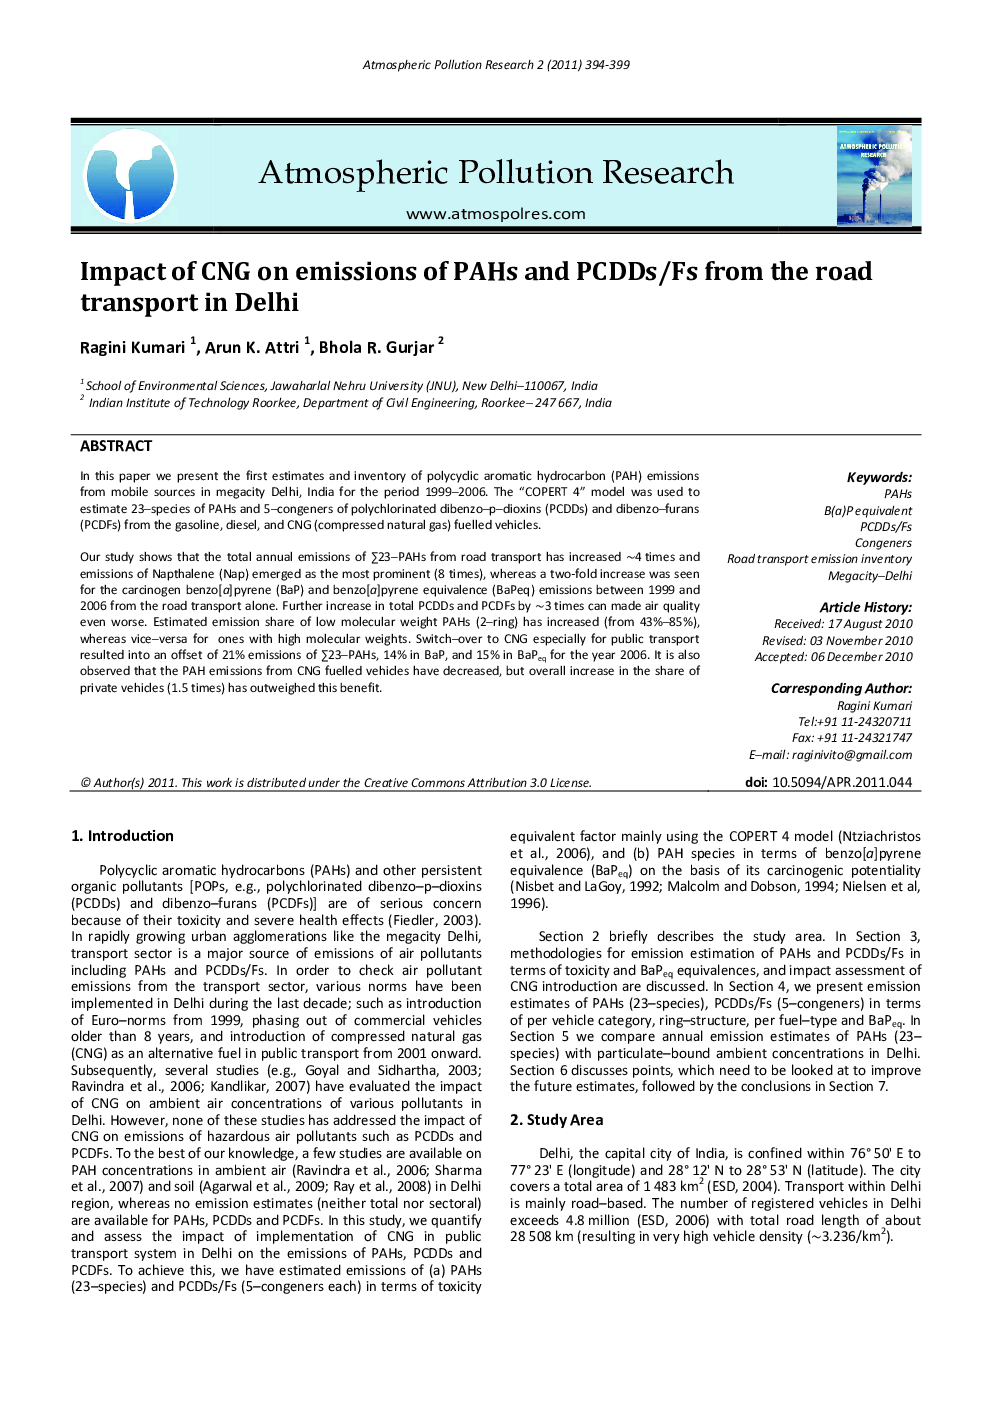 Impact of CNG on emissions of PAHs and PCDDs/Fs from the road transport in Delhi